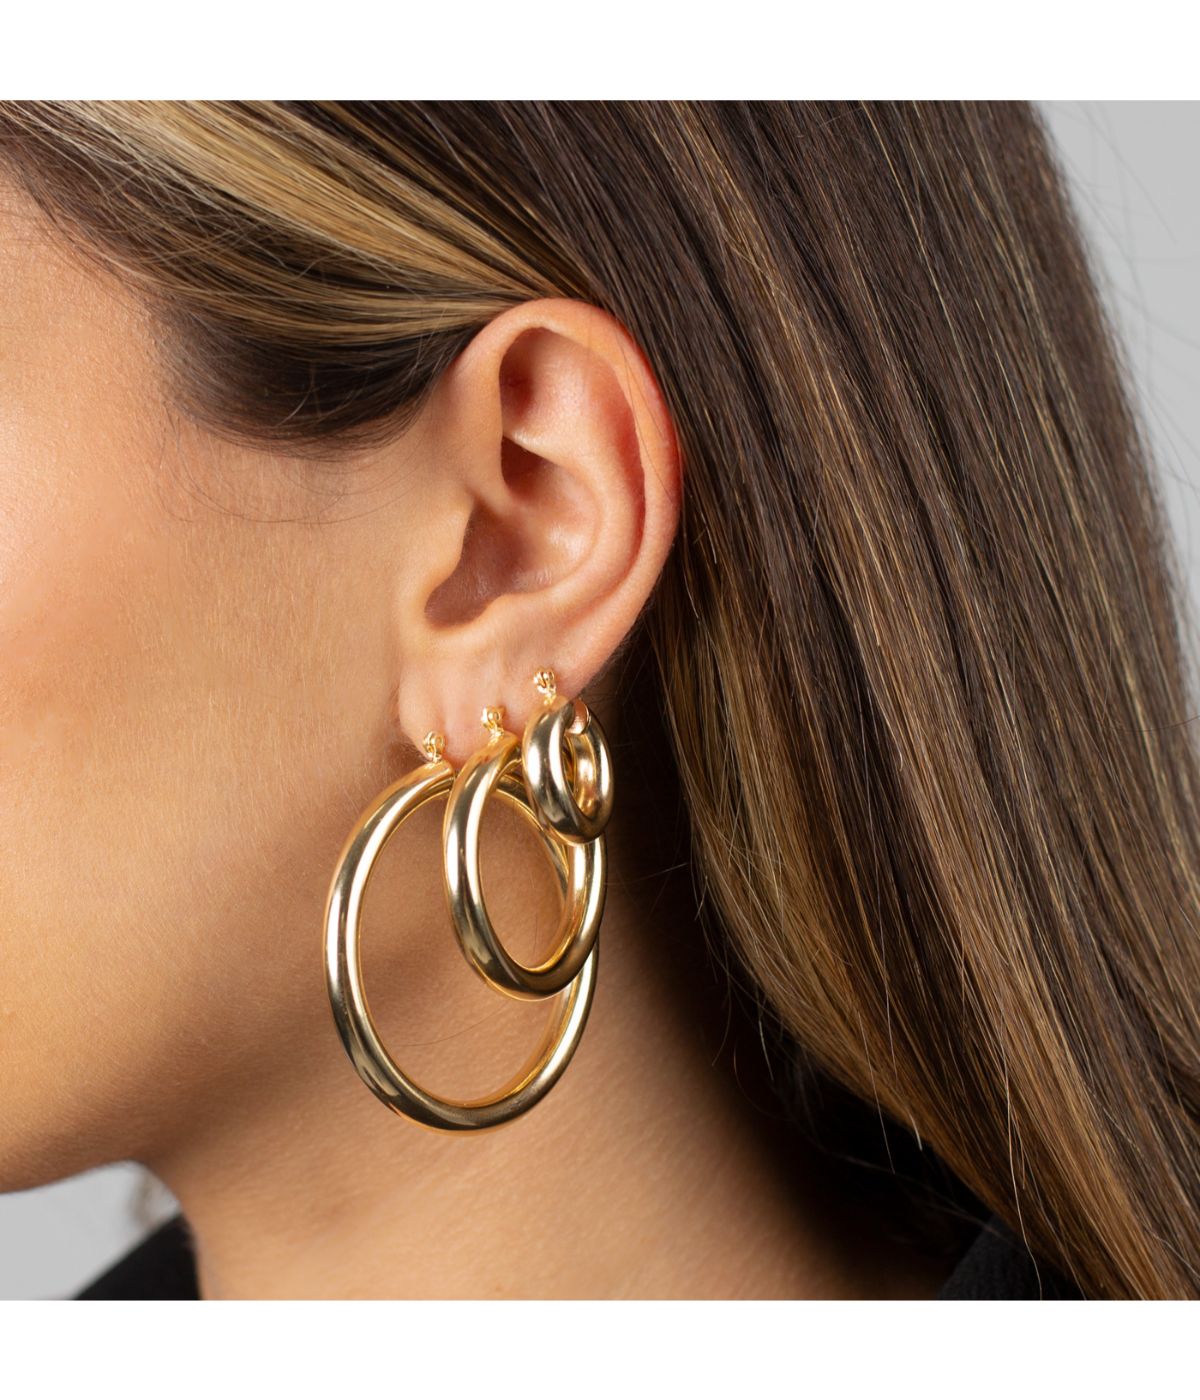 Gold Filled Adina'S Chunky Hollow Hoop Earring Gold